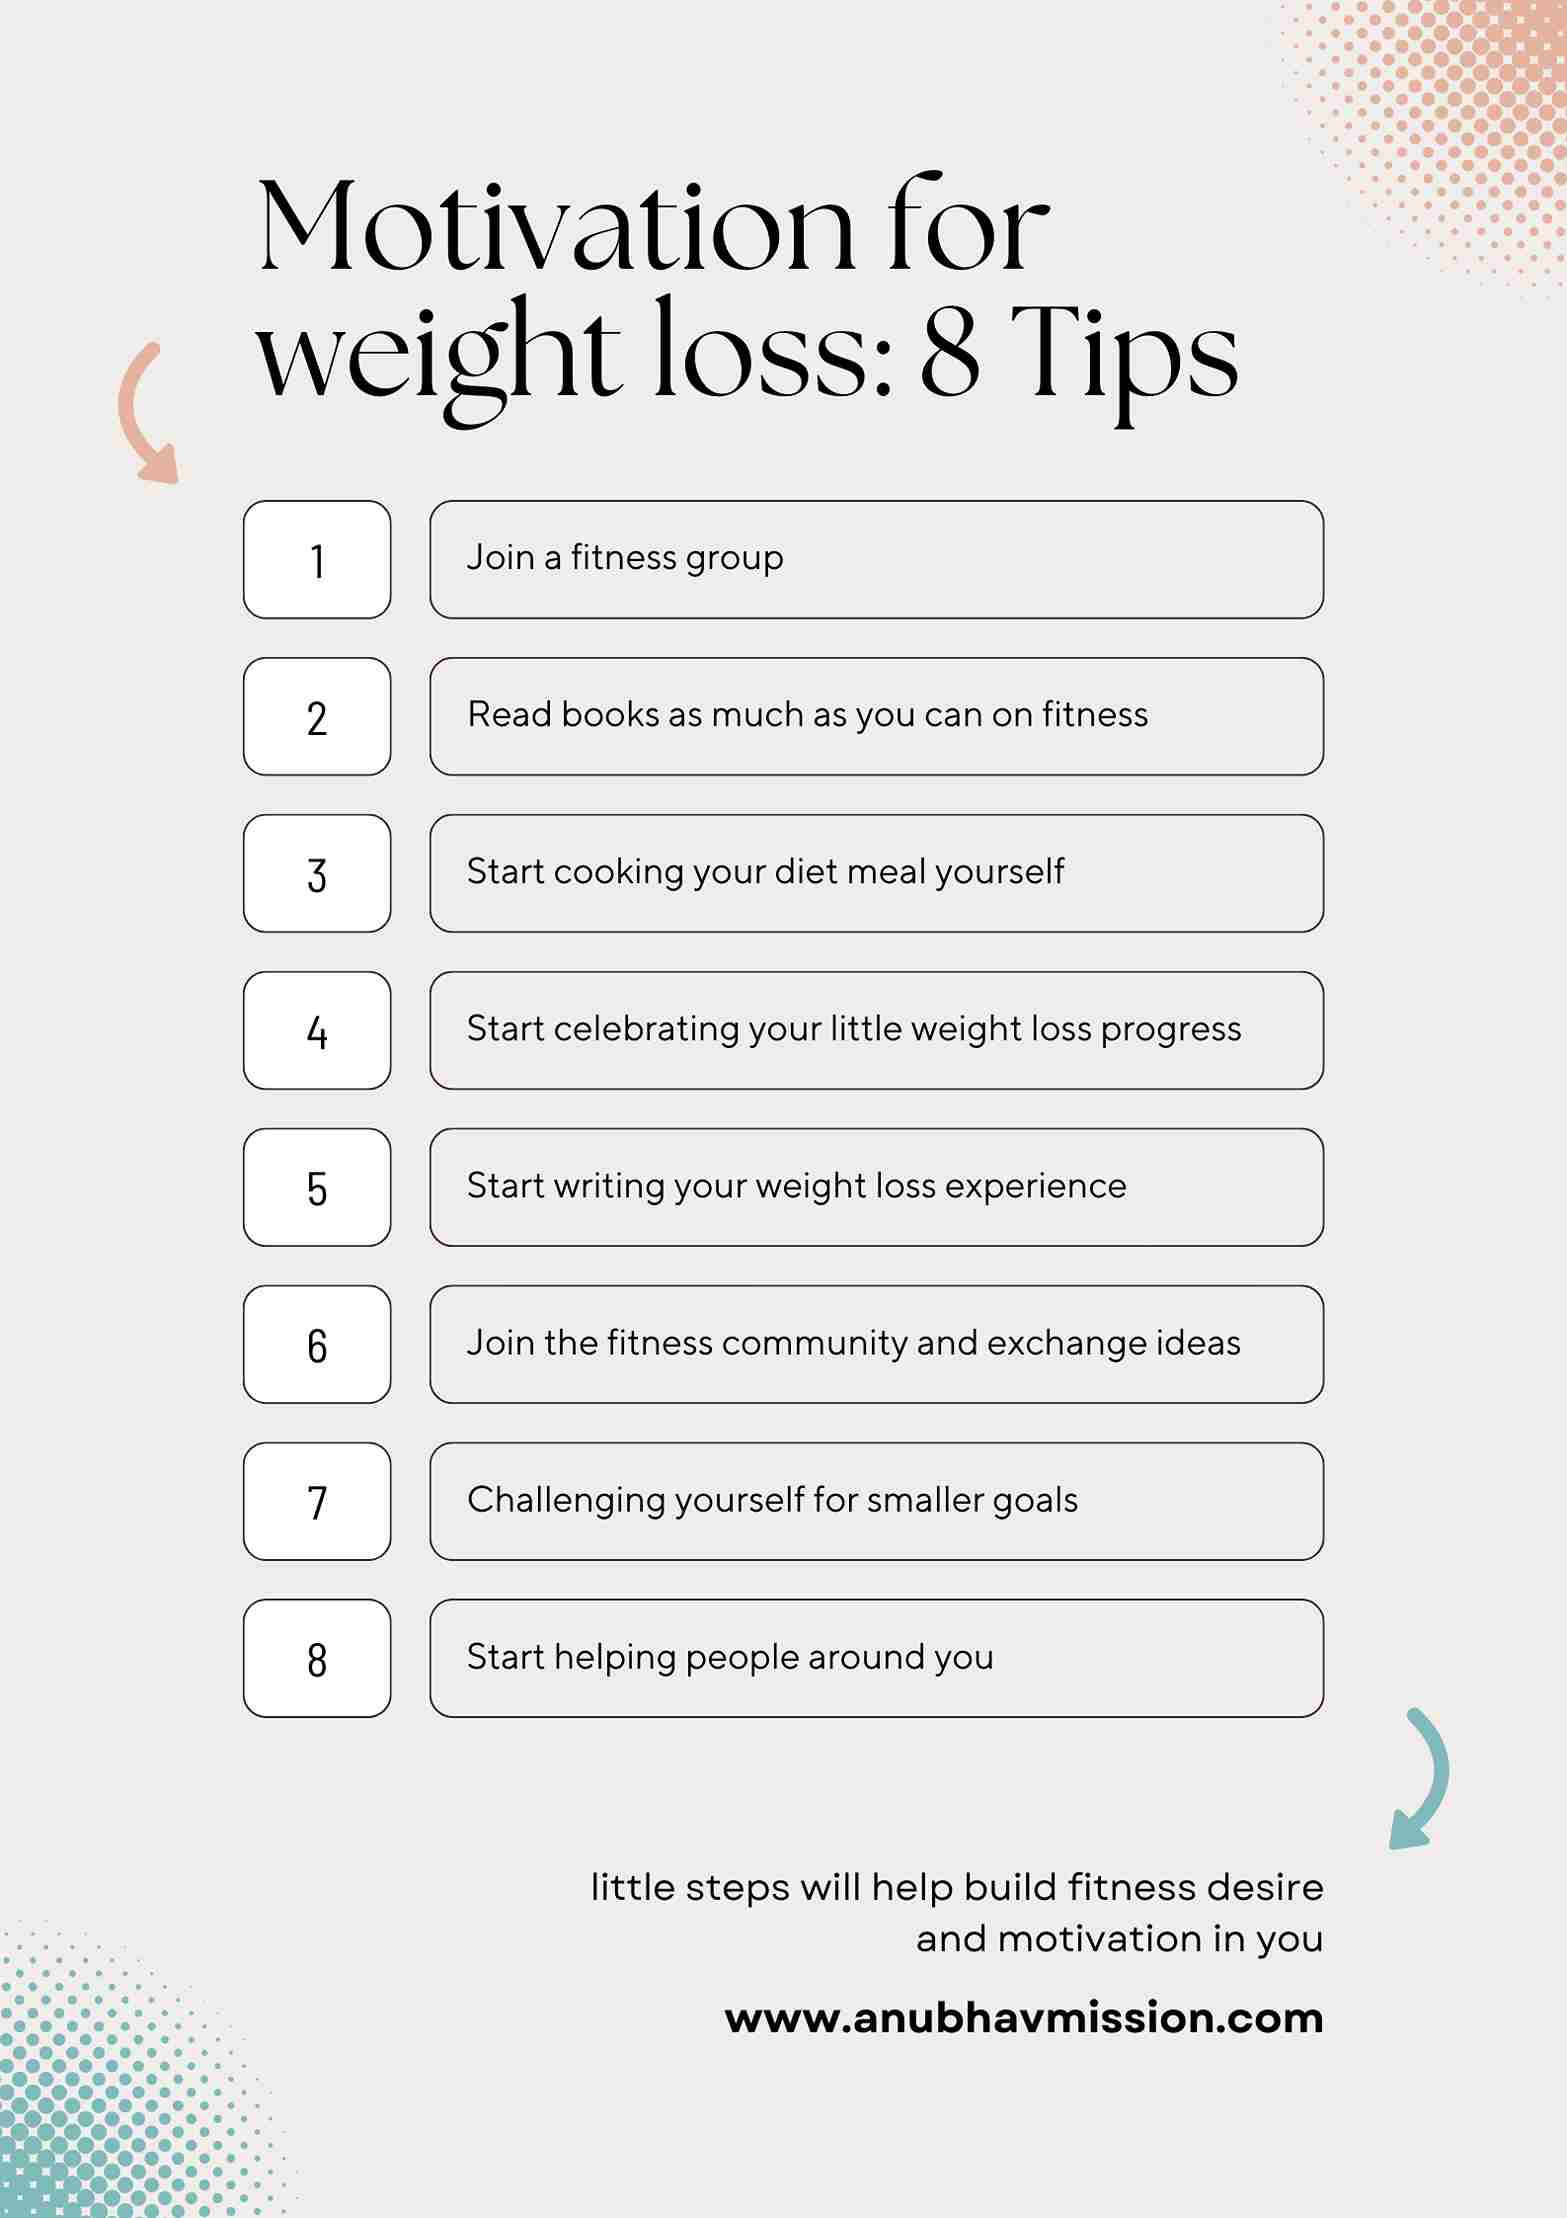 Motivation for weight loss: 8 Tips
